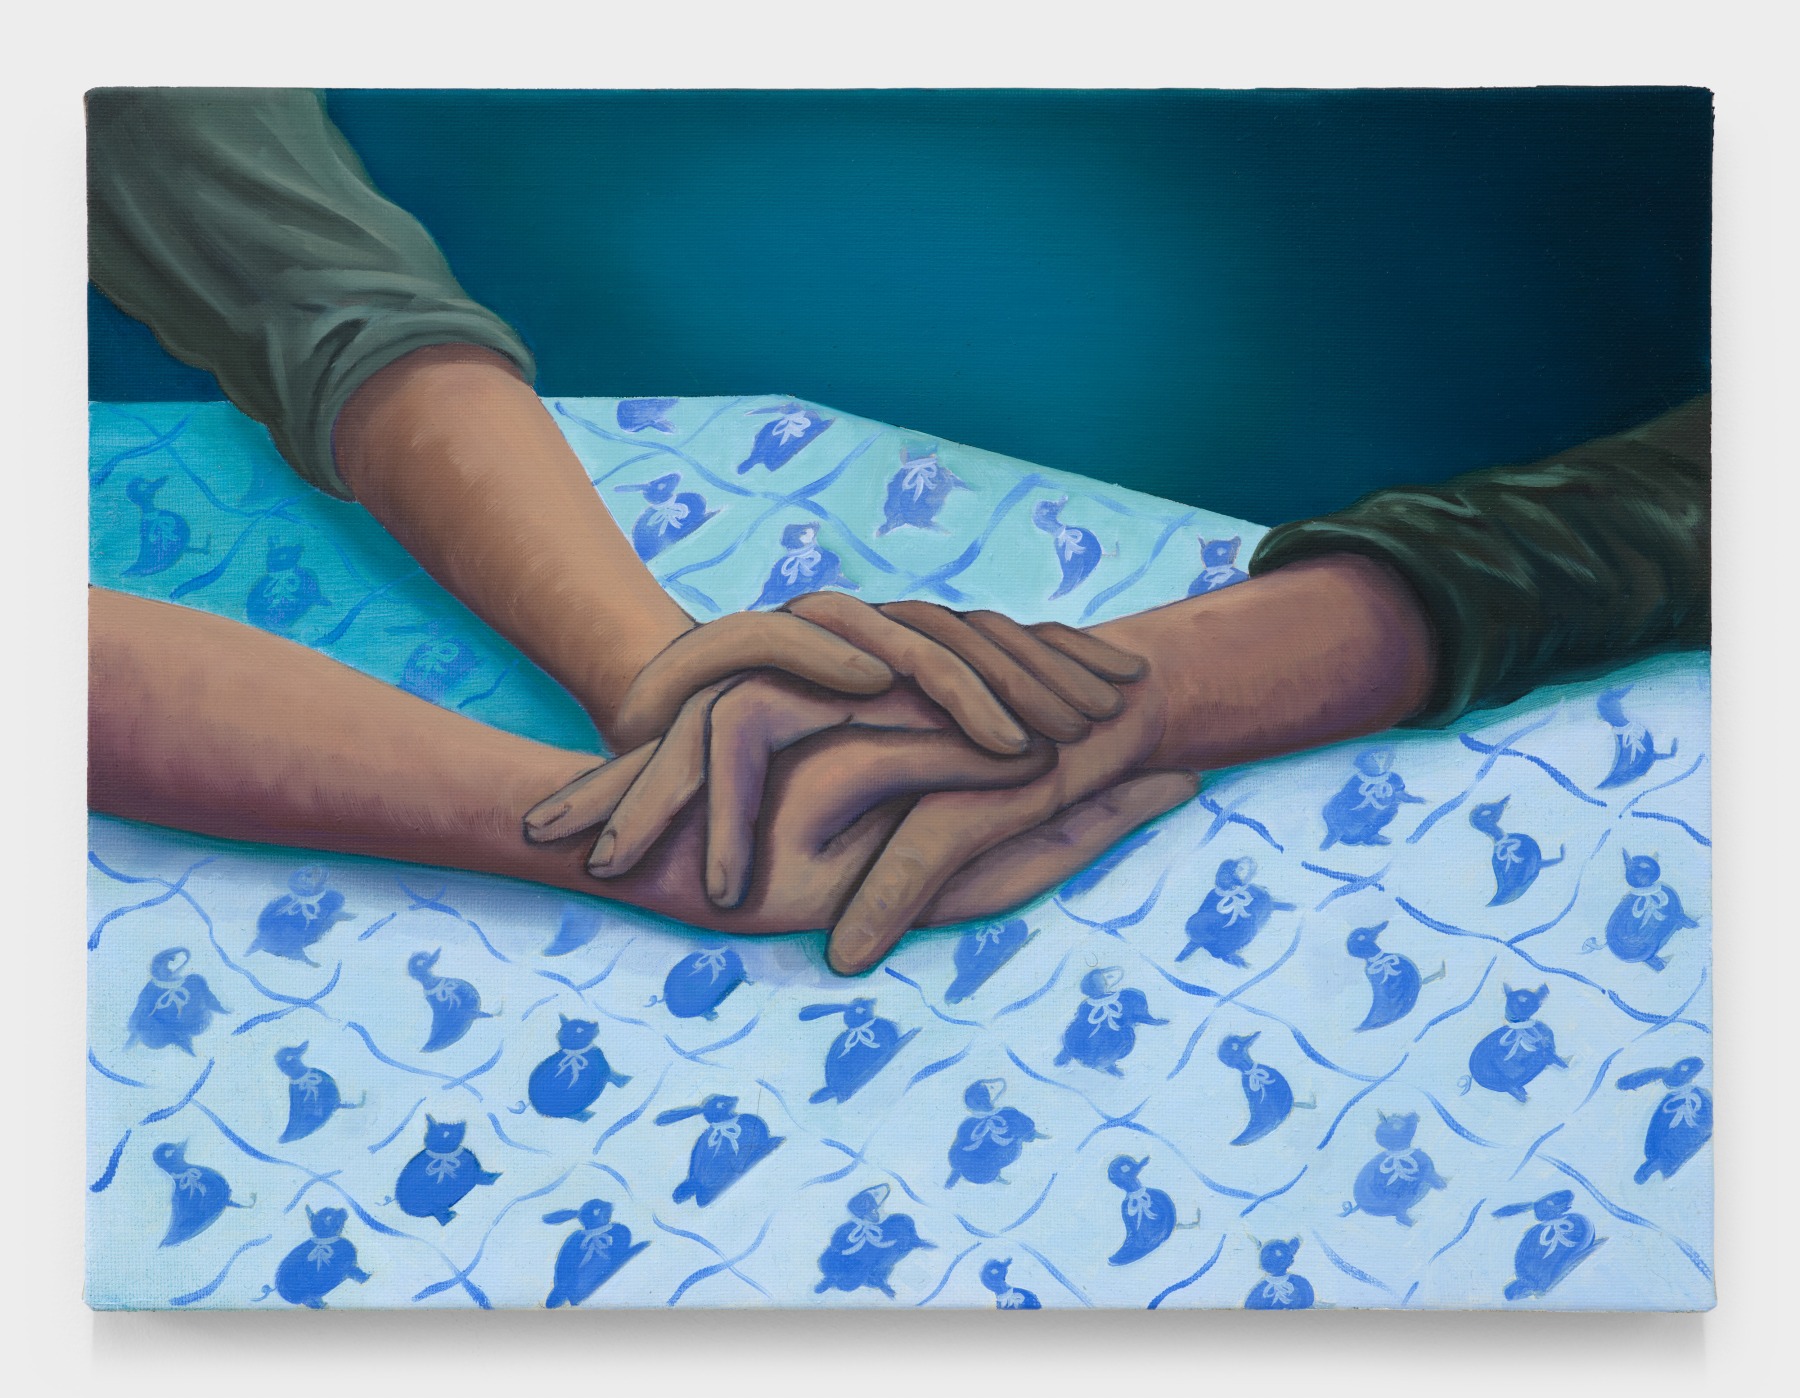 Bambou Gili's artwork "The Plan". A close up view of hands intertwined atop a tablecloth covered in cats, rabbits and ducks.12 x 16 in (30.5 x 40.6 cm), oil on linen, 2022